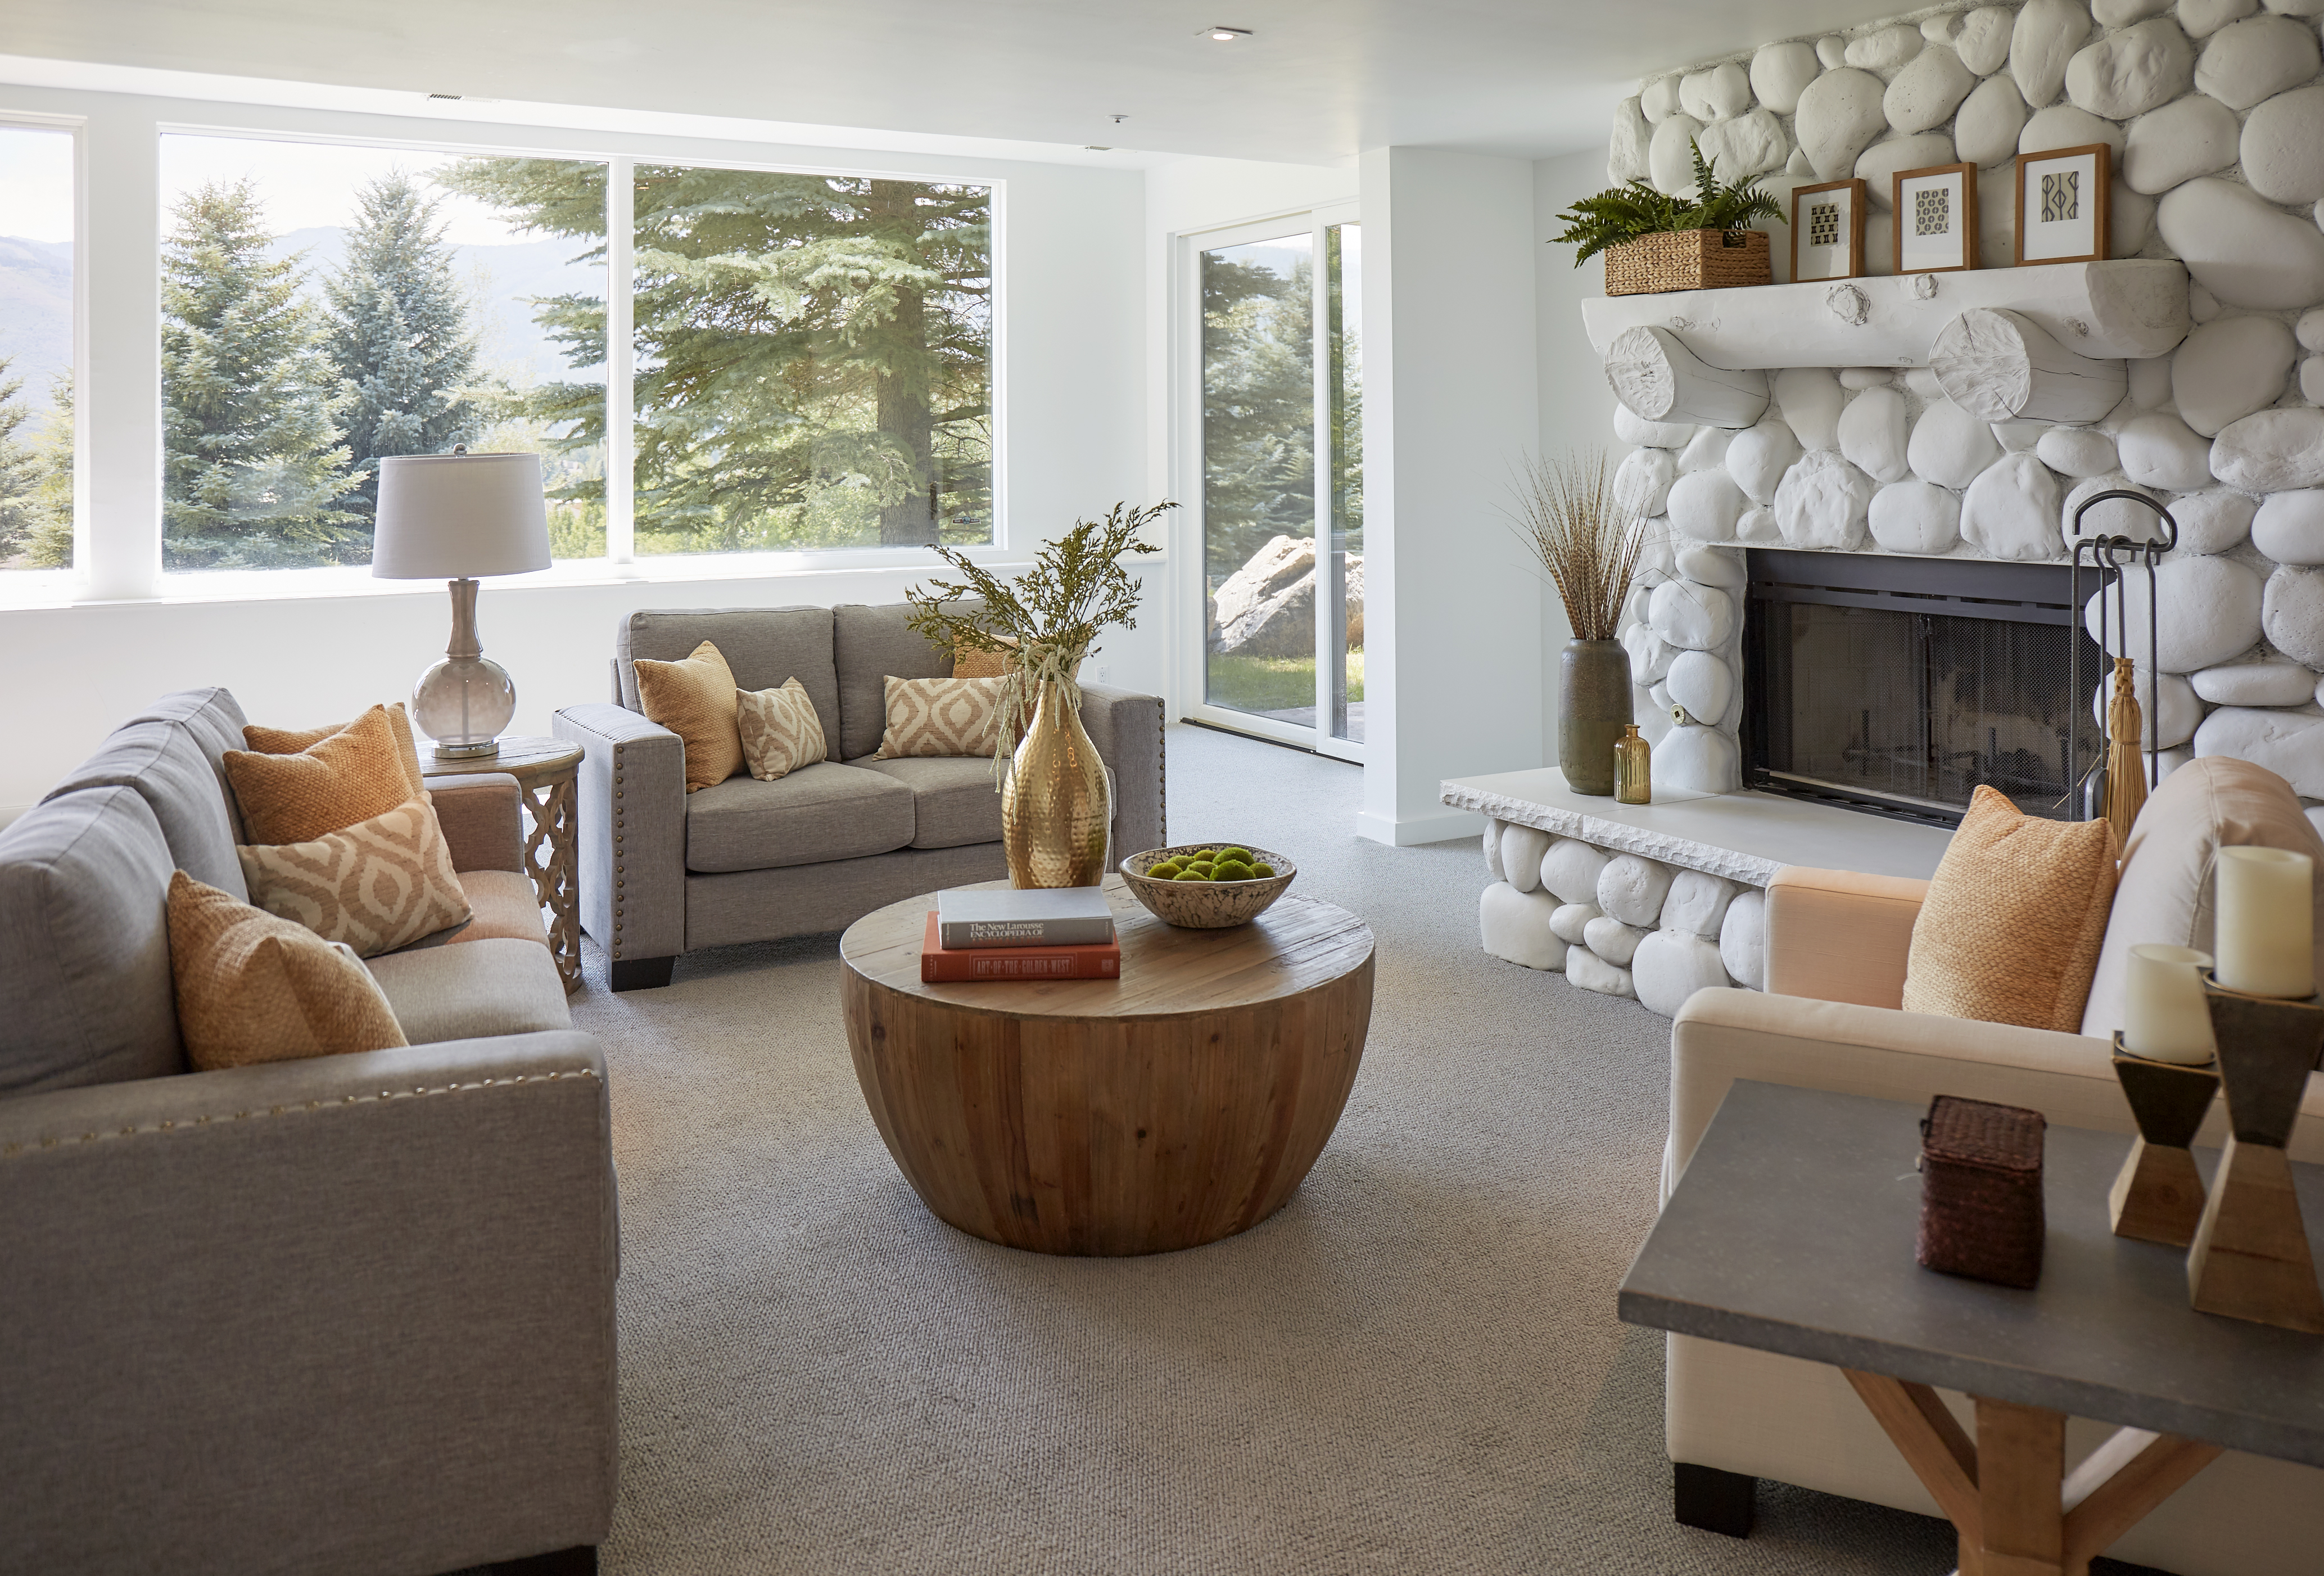 This modern and rustic space is a living room. There is a white stone and wood fireplace off to the side. There are grey linen upholstered sofa and loveseat and a white linen upholstered accent chair. The coffee table is a reclaimed wood drum-shaped coffee table. 